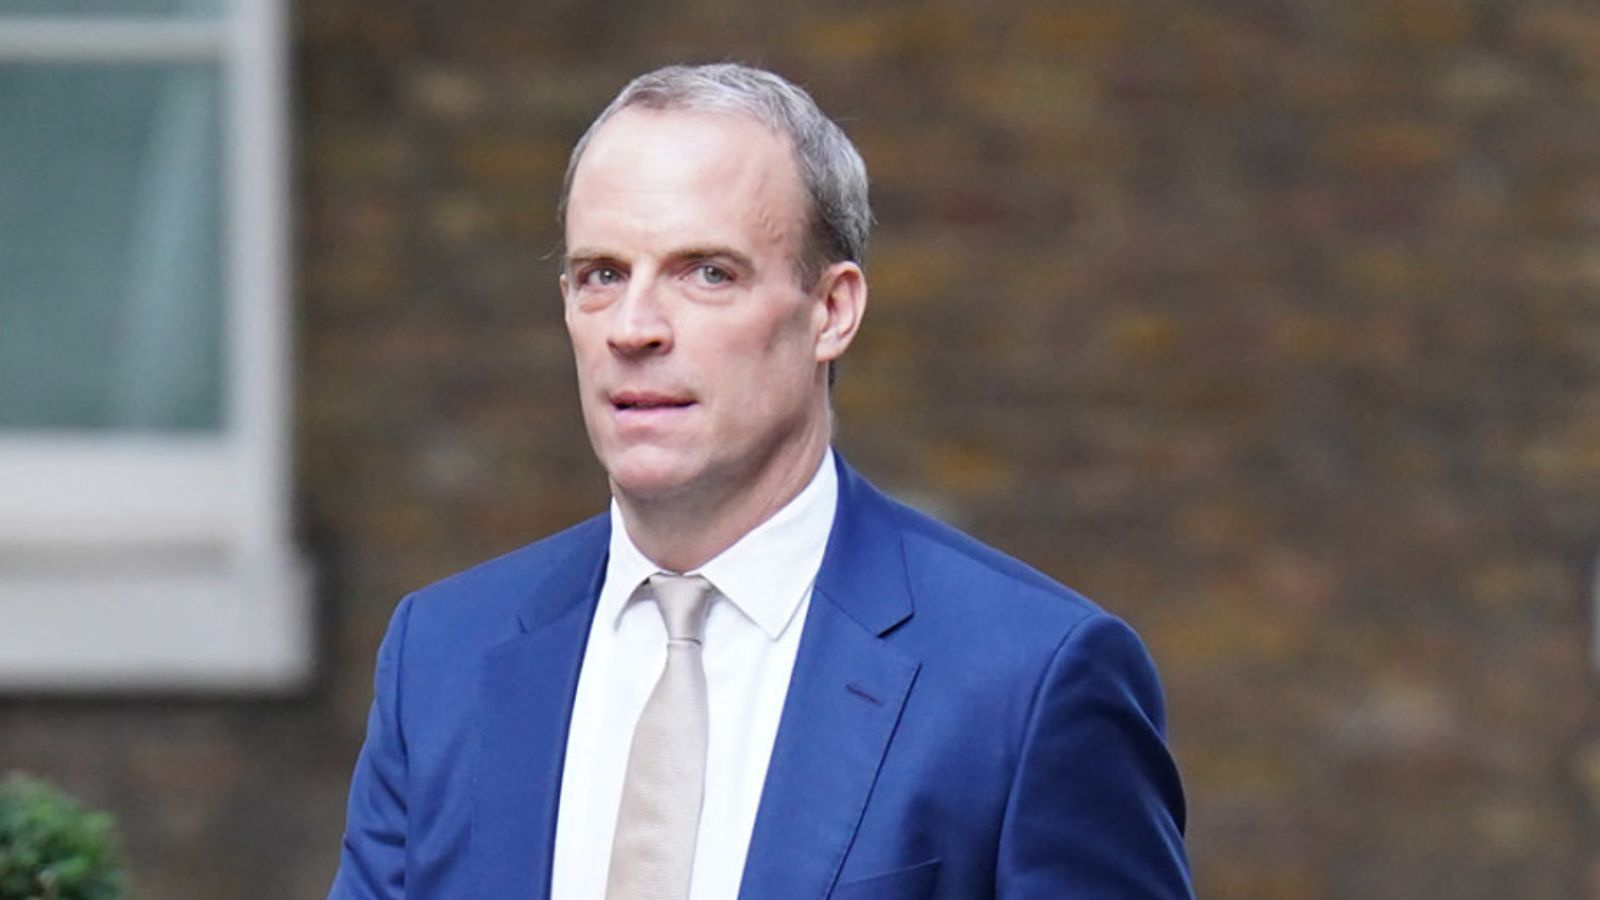 Dominic Raab denies bullying after requesting investigation into himself over two complaints